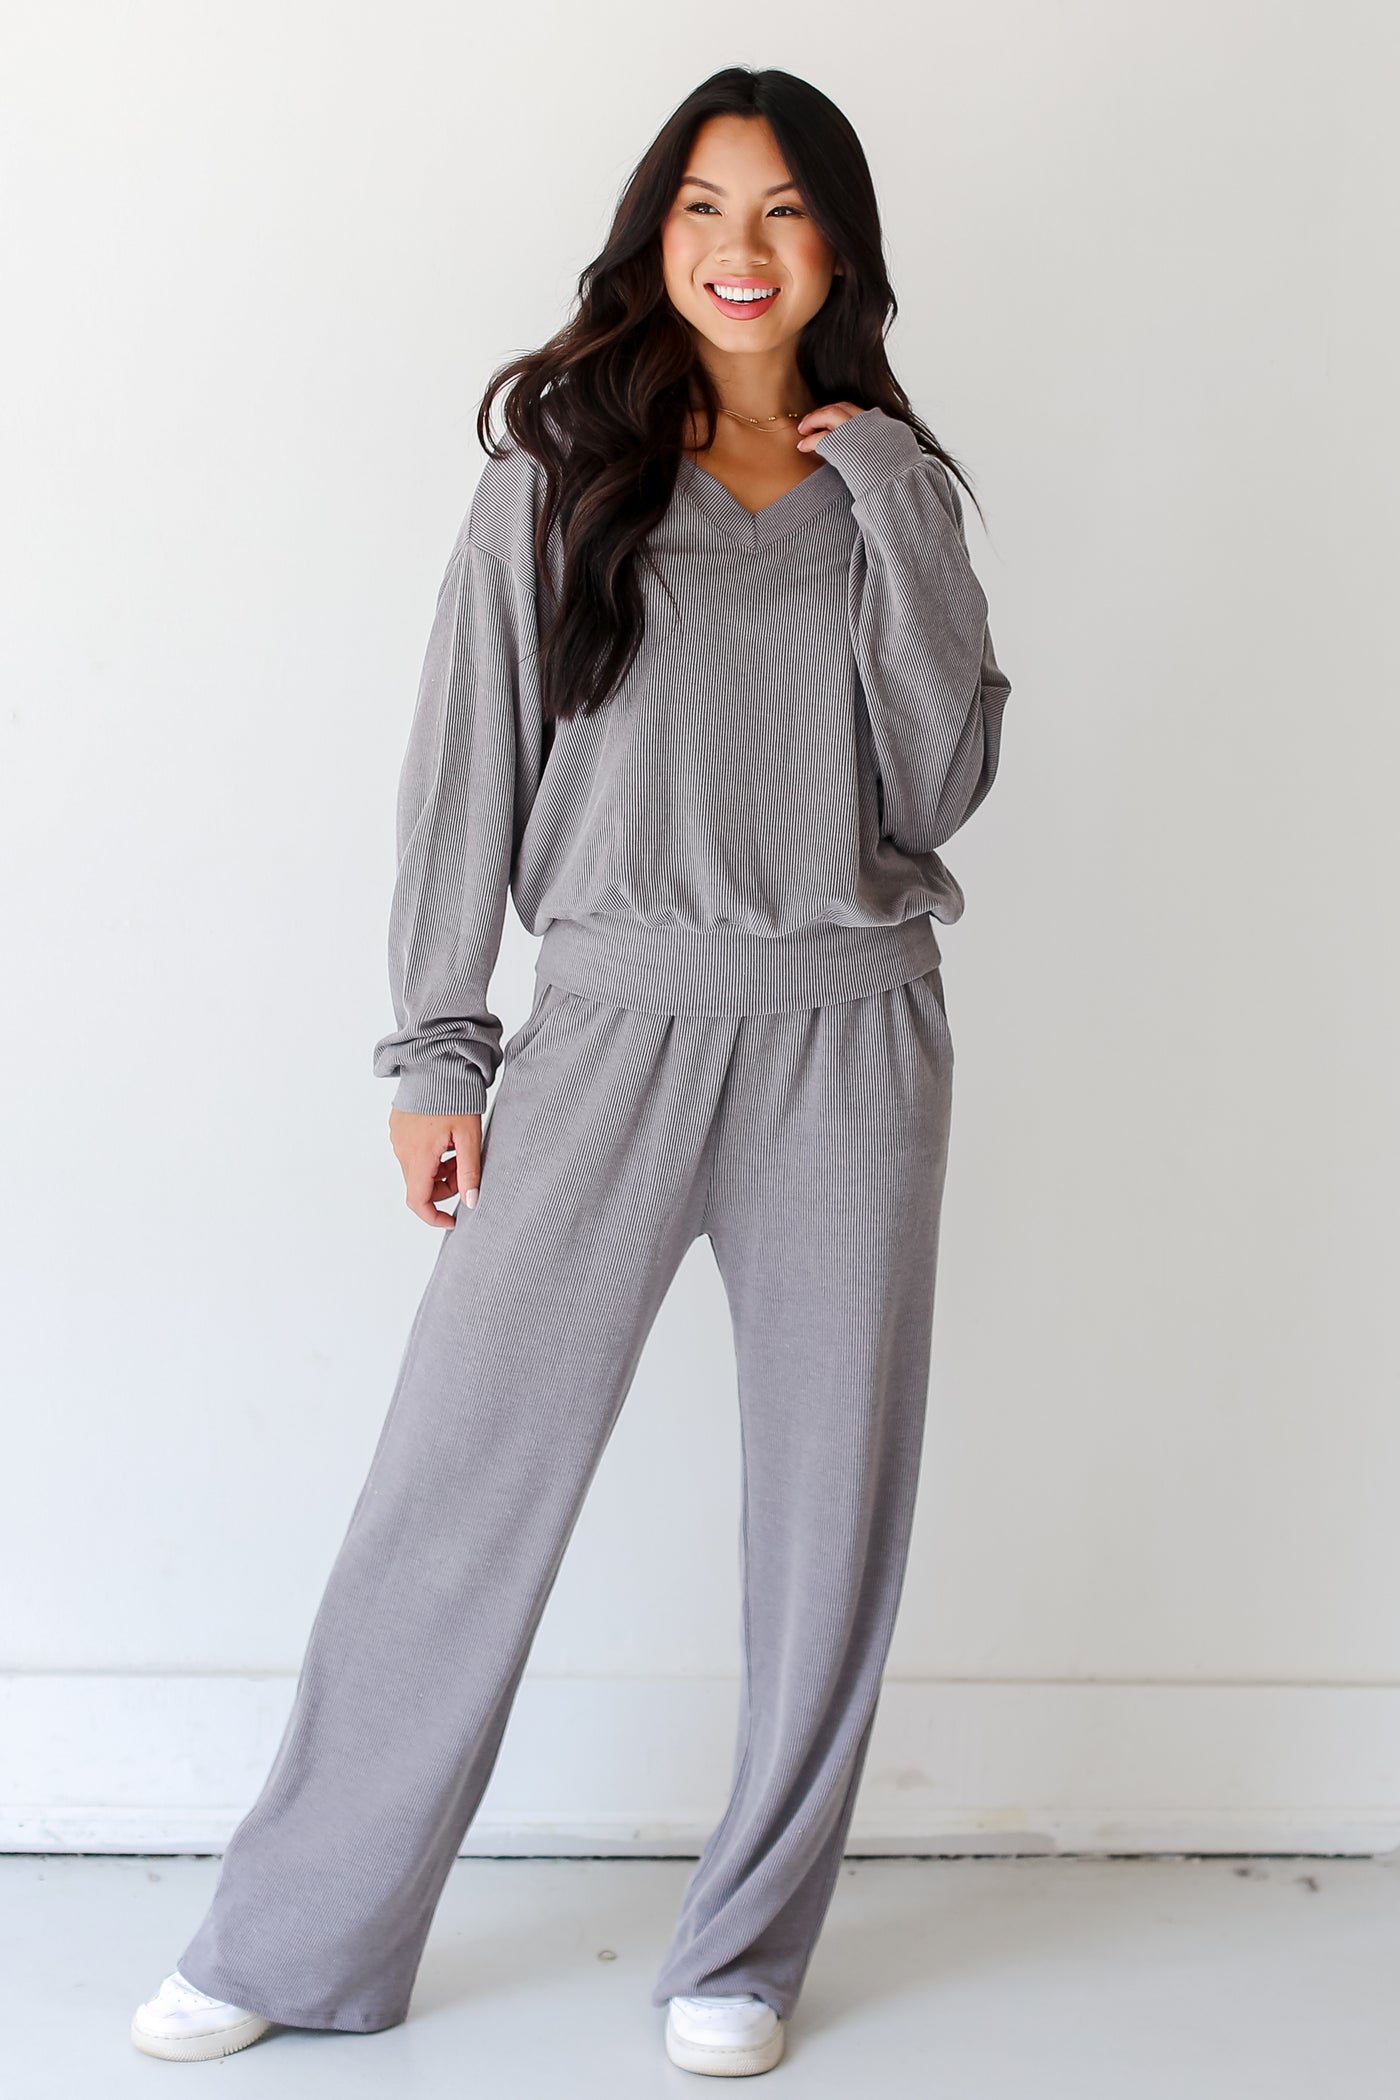 grey Corded Pullover with the matching pants